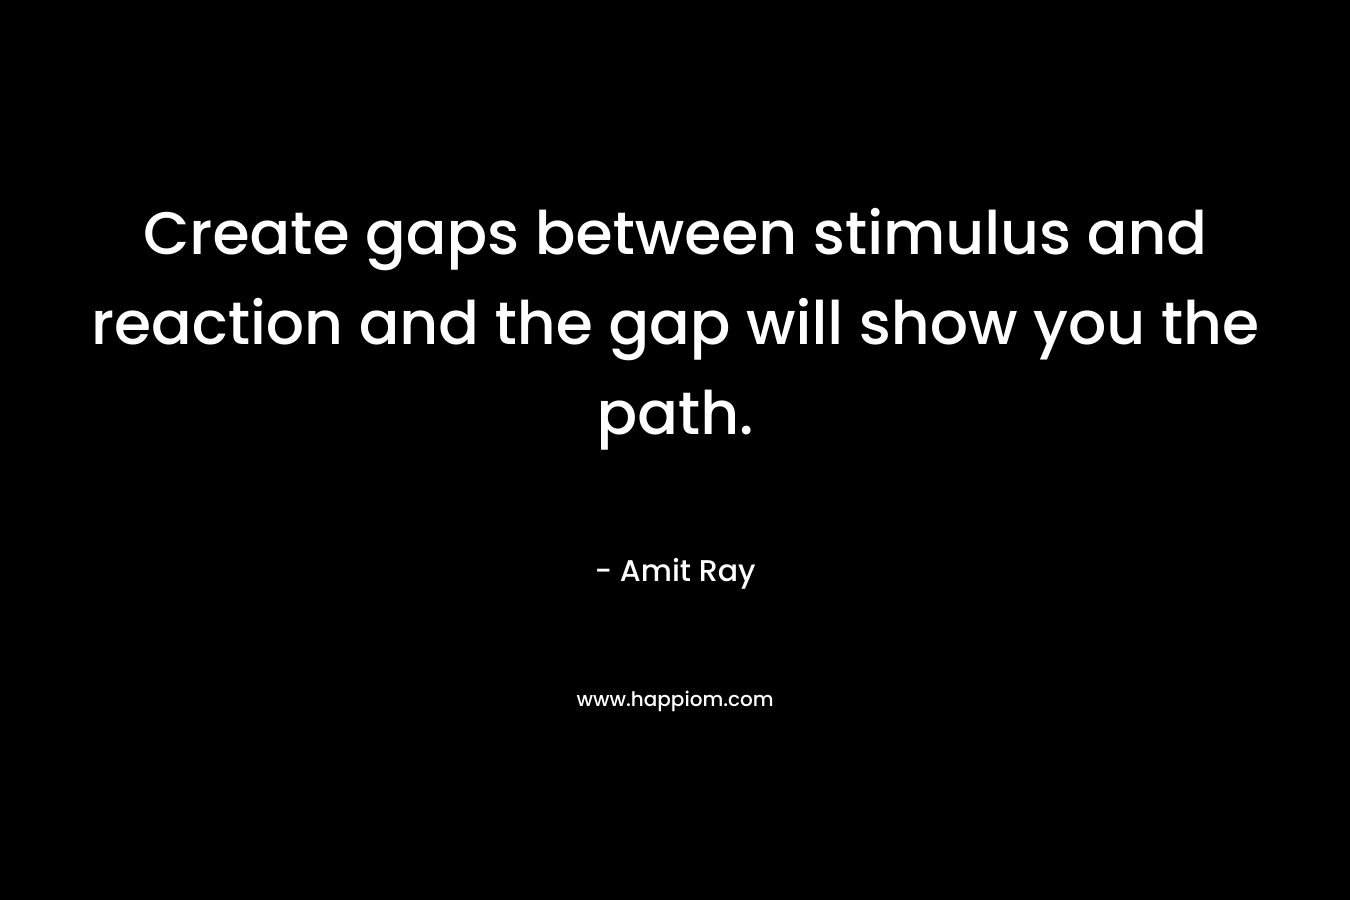 Create gaps between stimulus and reaction and the gap will show you the path.